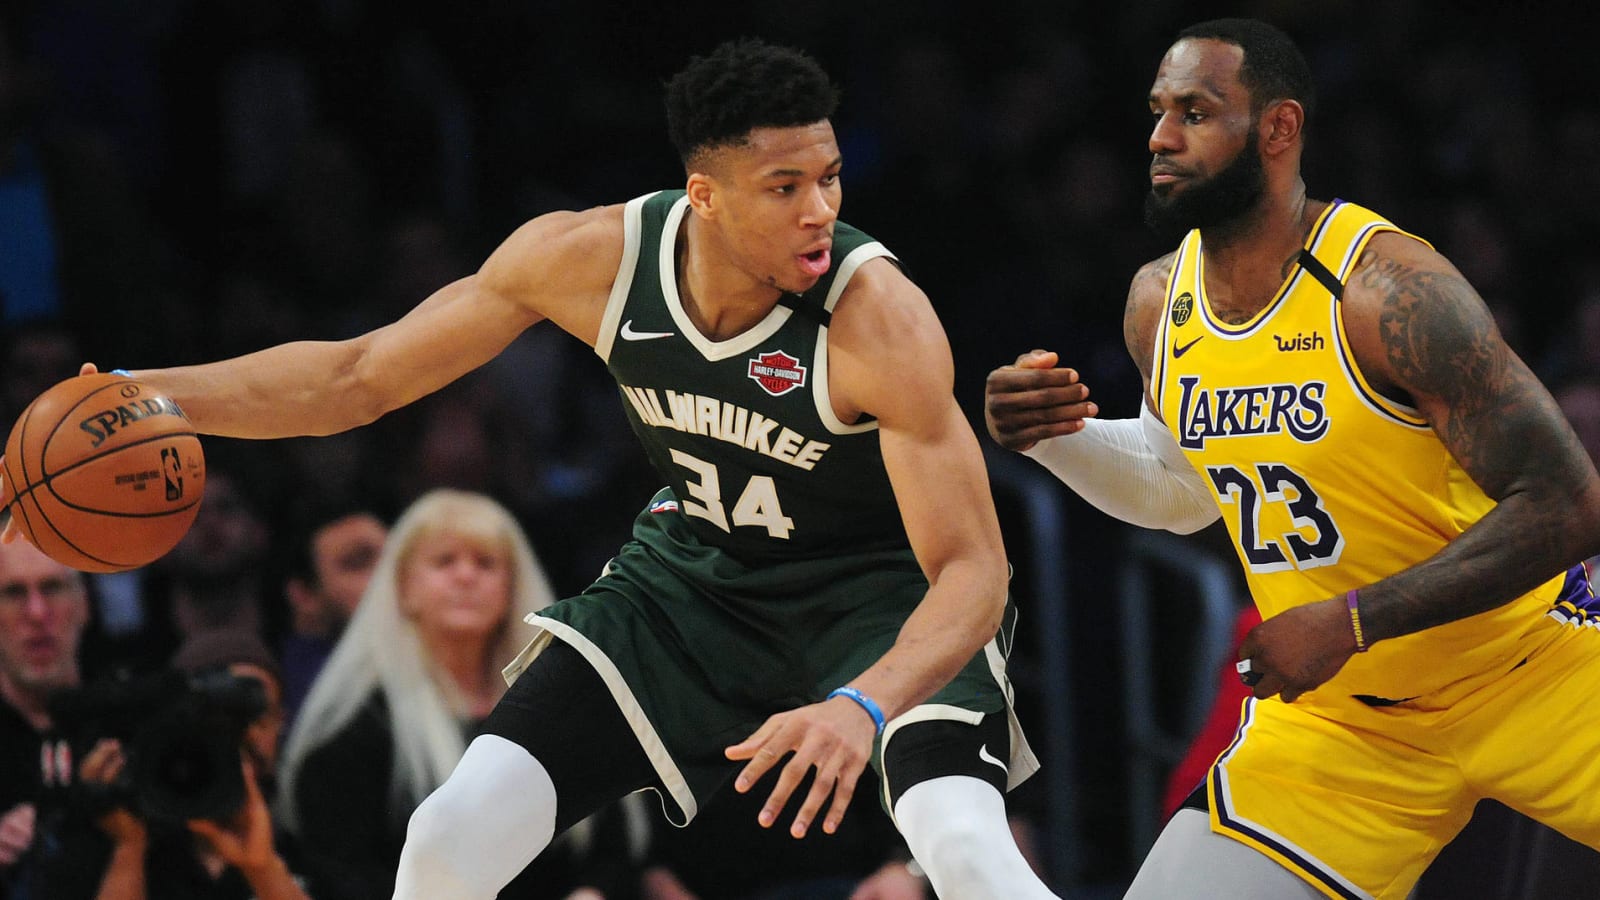 LeBron James bests Giannis Antetokounmpo in MVP duel at Staples